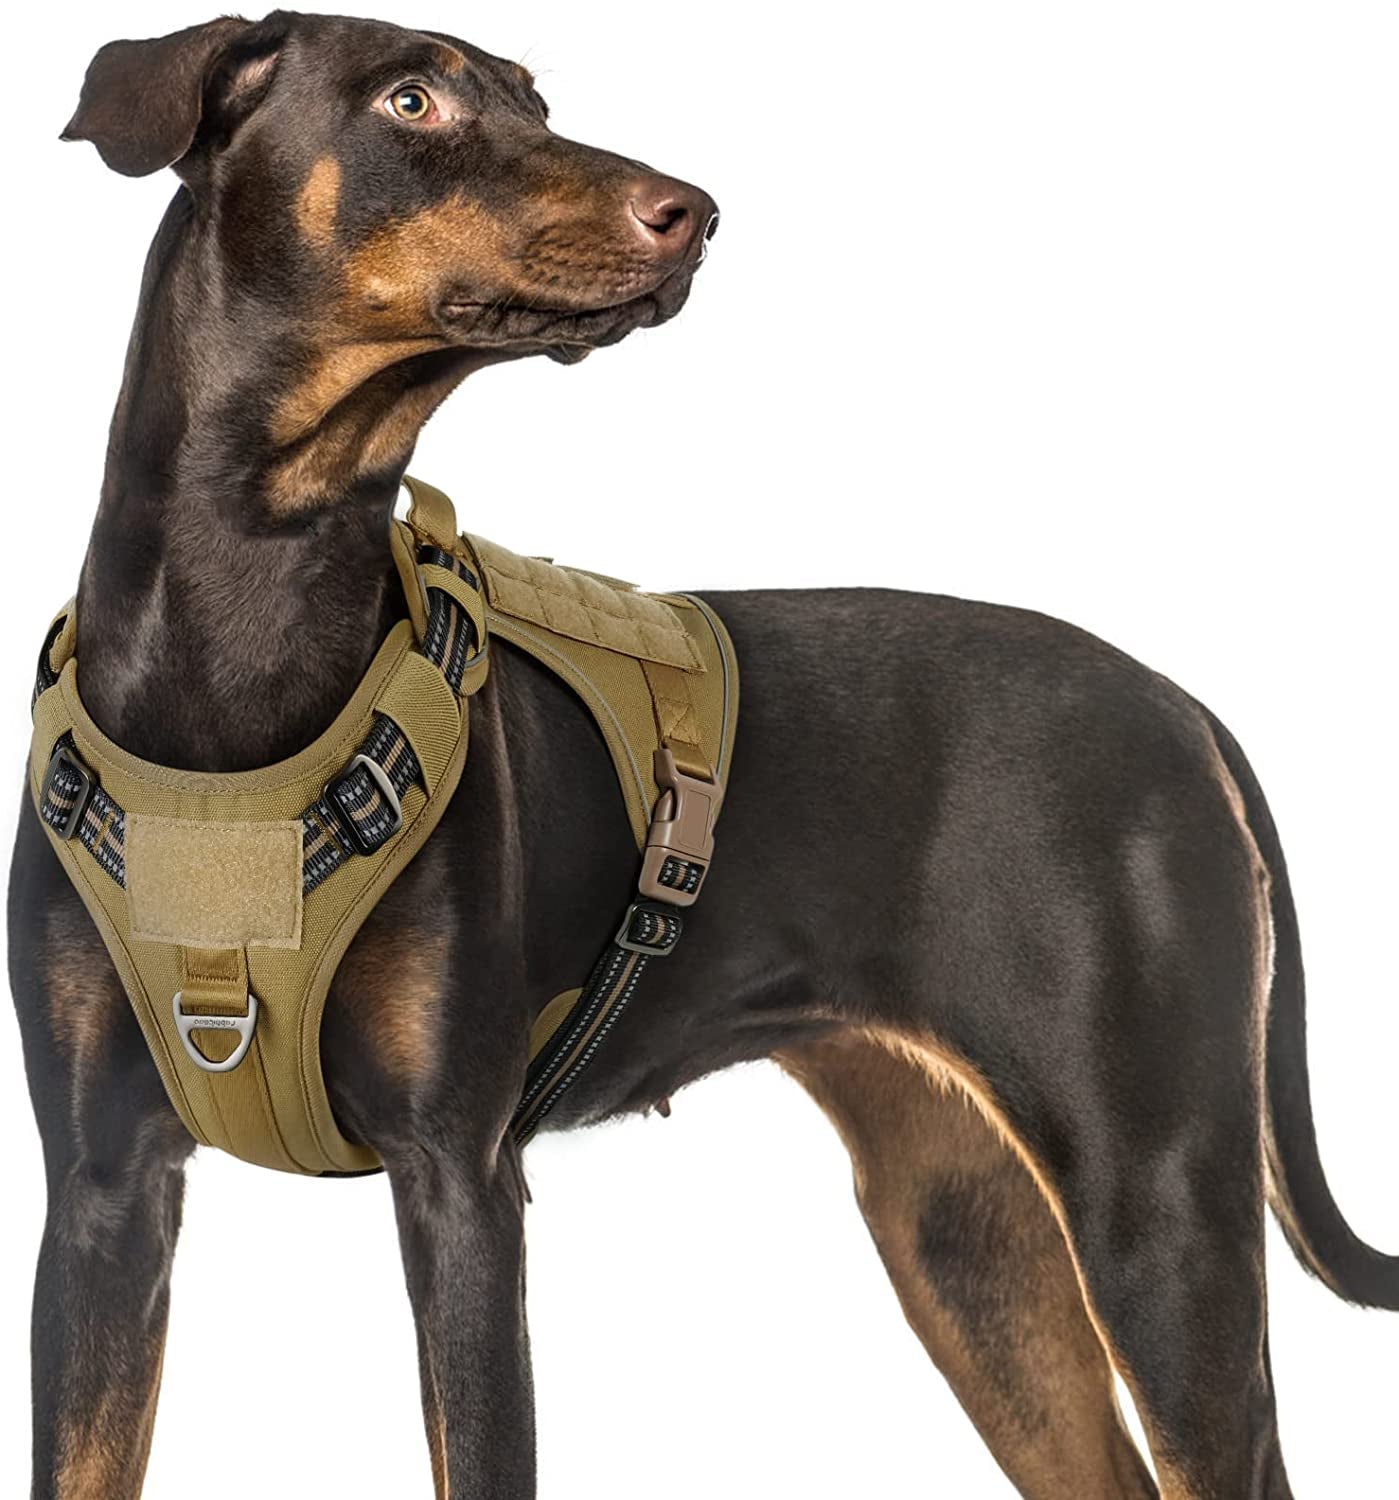 Rabbitgoo Tactical Dog Harness No Pull, Military Dog Vest Harness with Handle & Molle, Easy Control Service Dog Harness for Large Dogs Training Walking, Adjustable Reflective Pet Harness, Black, L Animals & Pet Supplies > Pet Supplies > Dog Supplies > Dog Apparel GLOBEGOU CO.,LTD Brown Large 